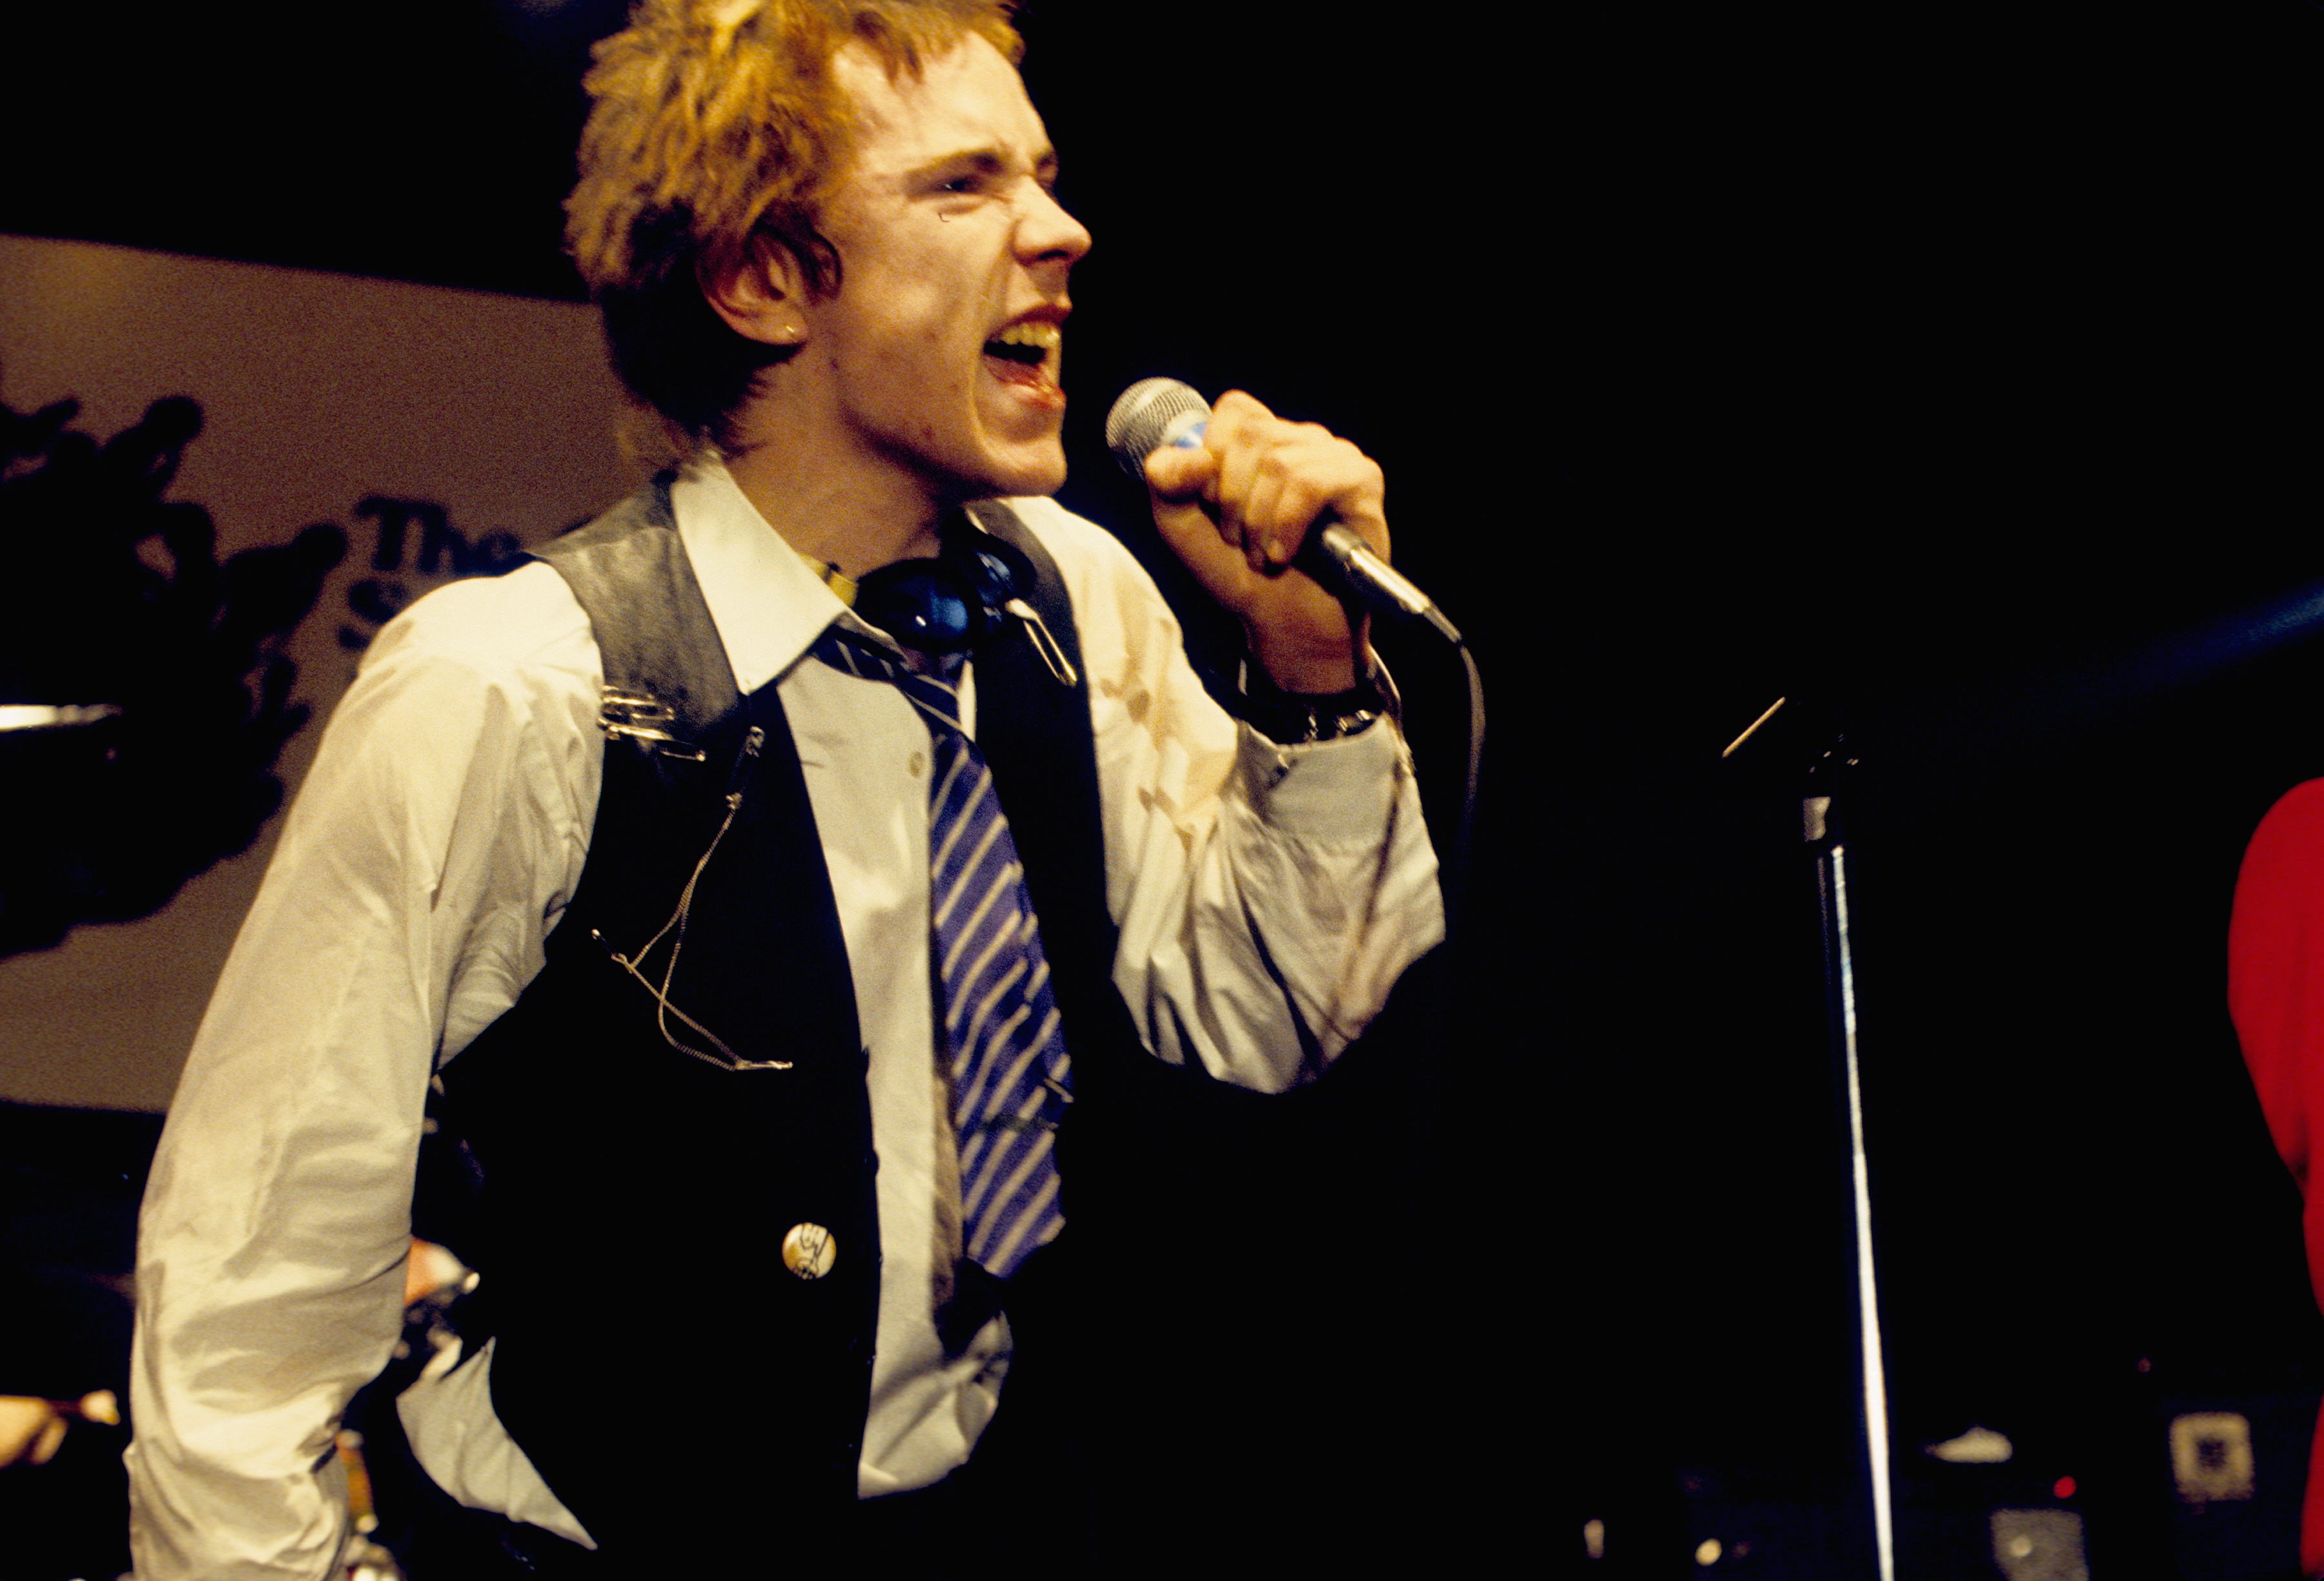 Sex Pistols' Johnny Rotten holding a microphone